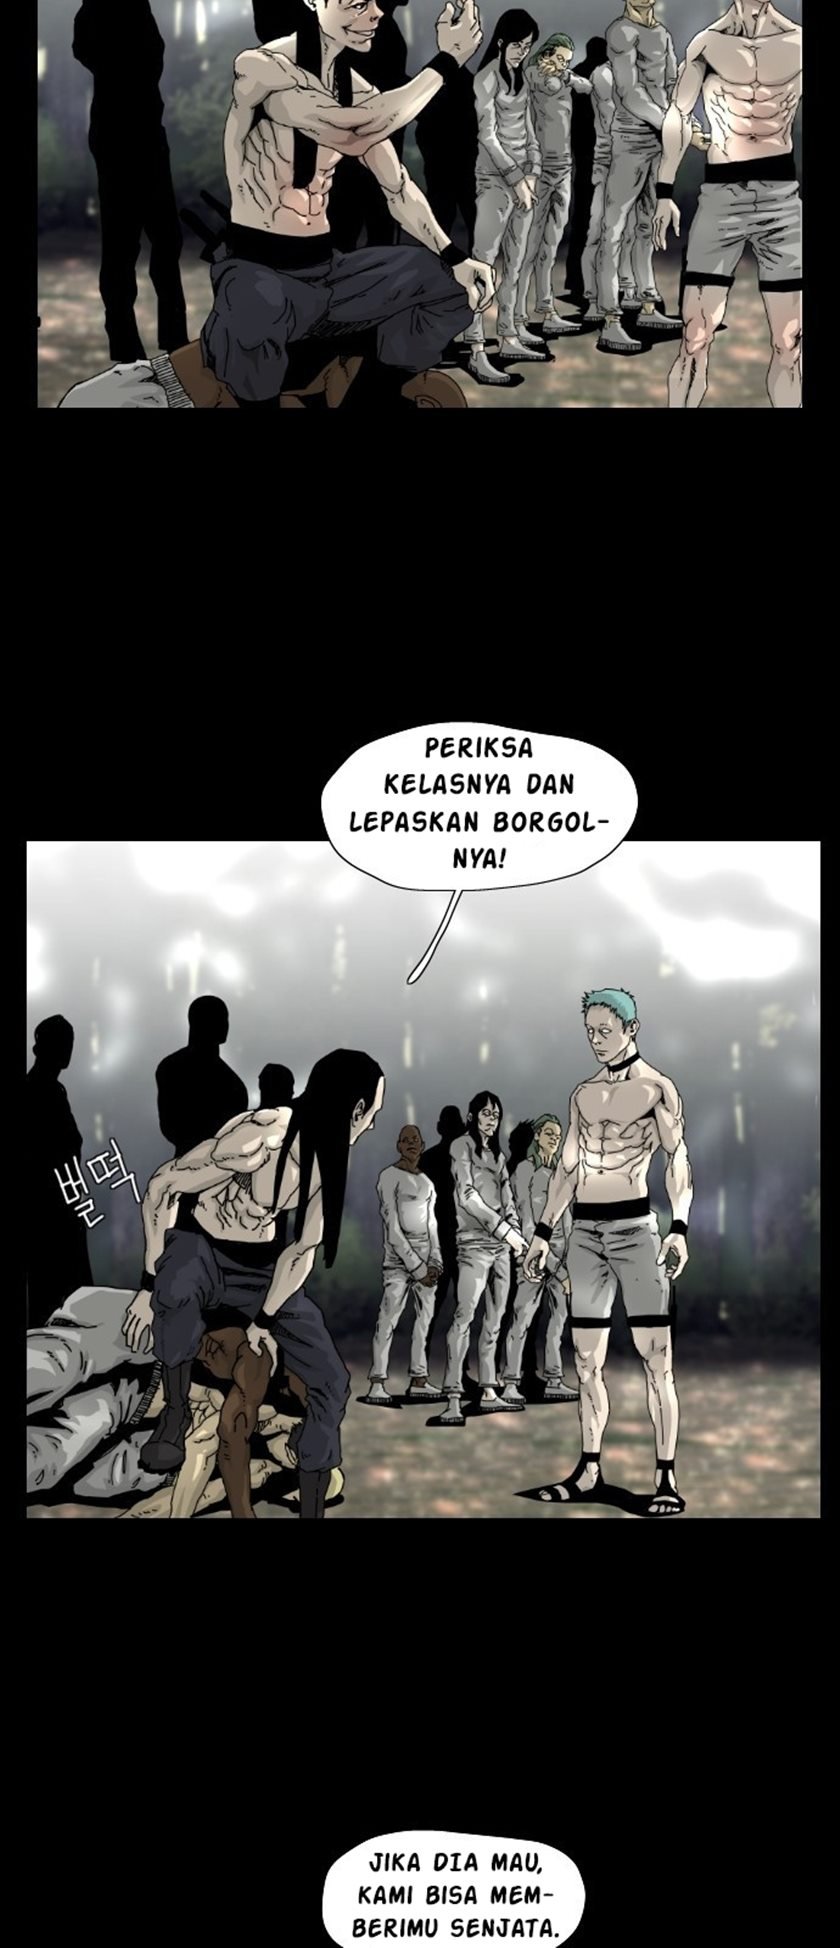 Hell 58 Chapter 05